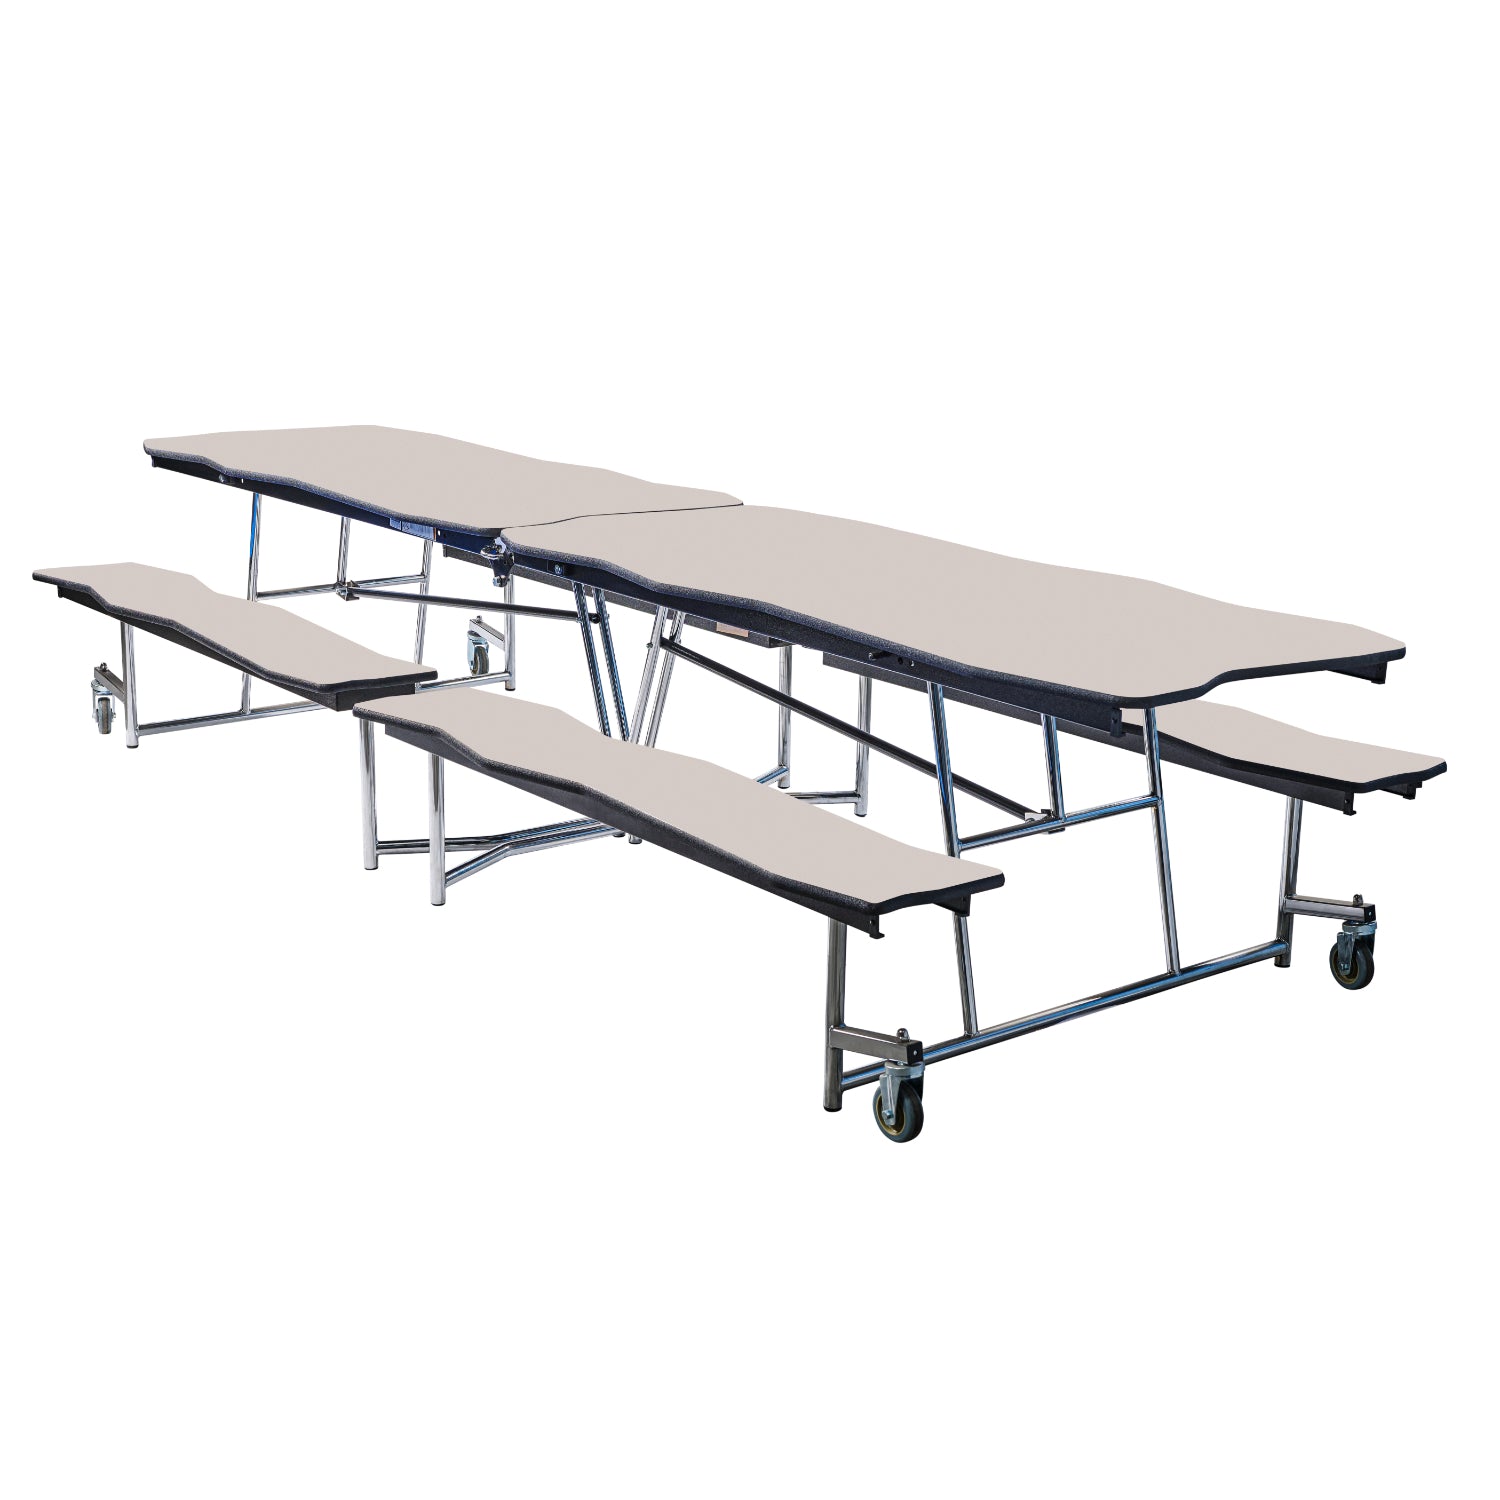 Mobile Cafeteria Table with Benches, 12' Bedrock, MDF Core, Black ProtectEdge, Chrome Frame